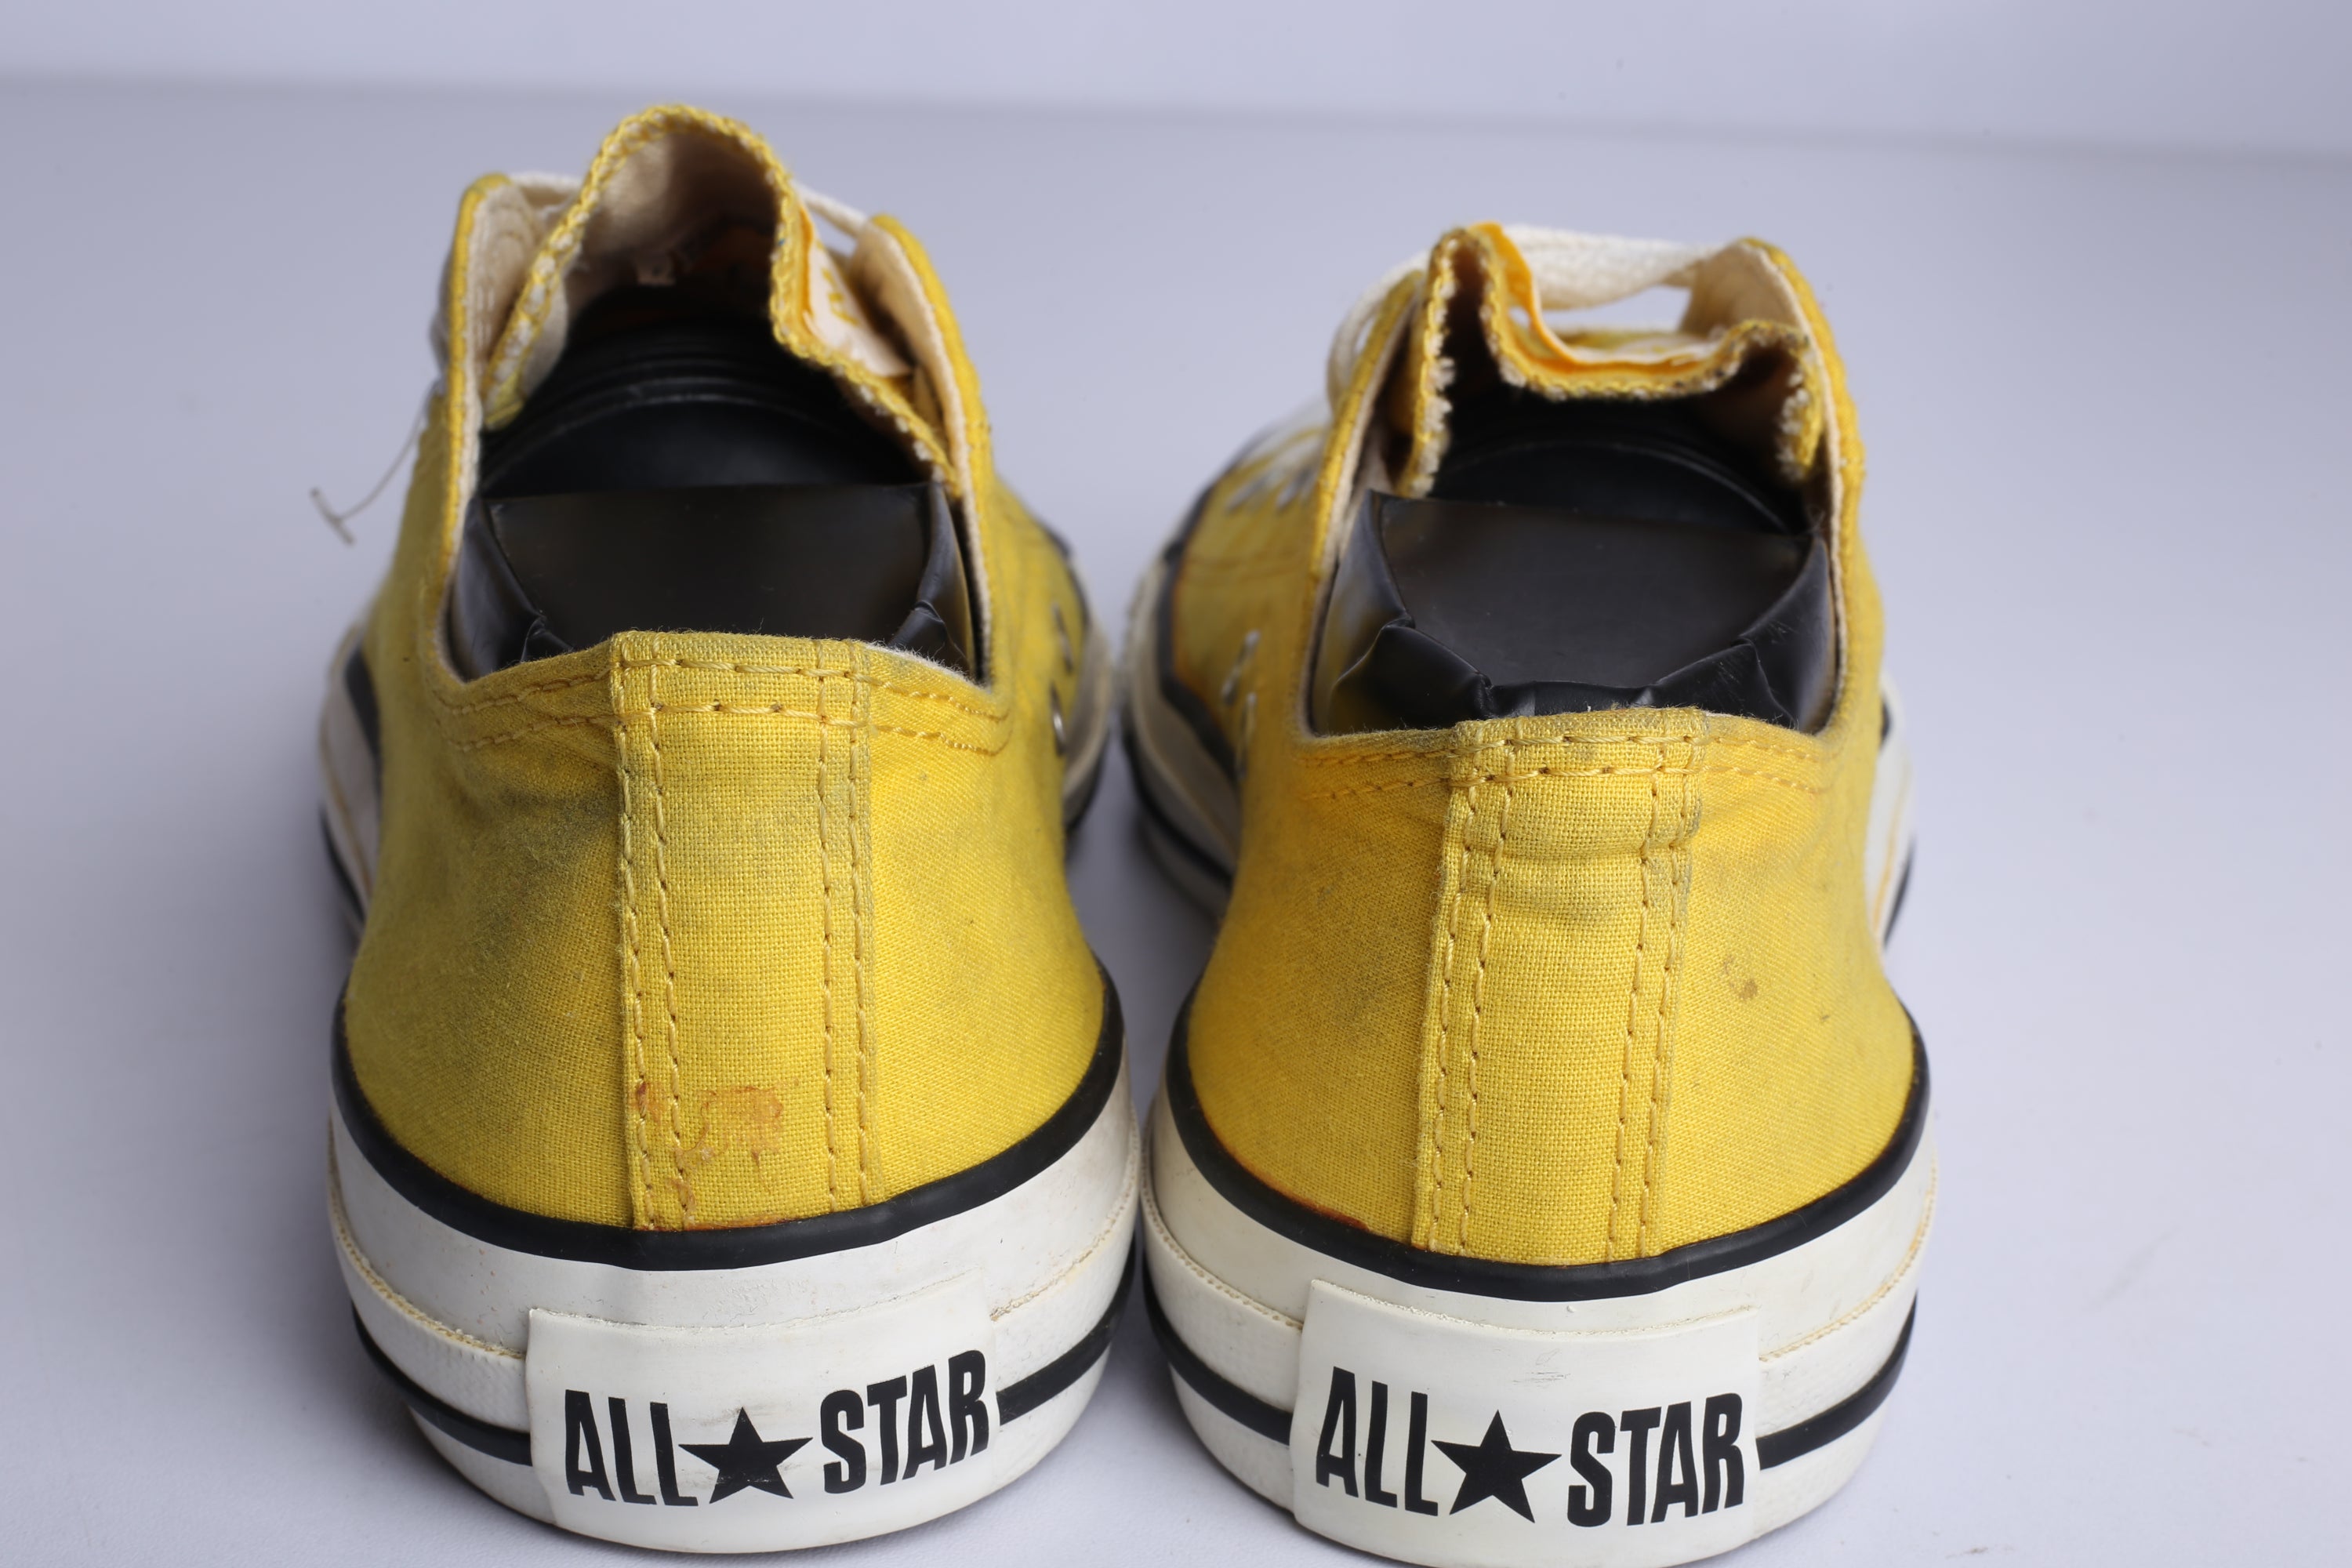 Chuck Taylor All Star Low Yellow Sneaker - (Condition Premium)